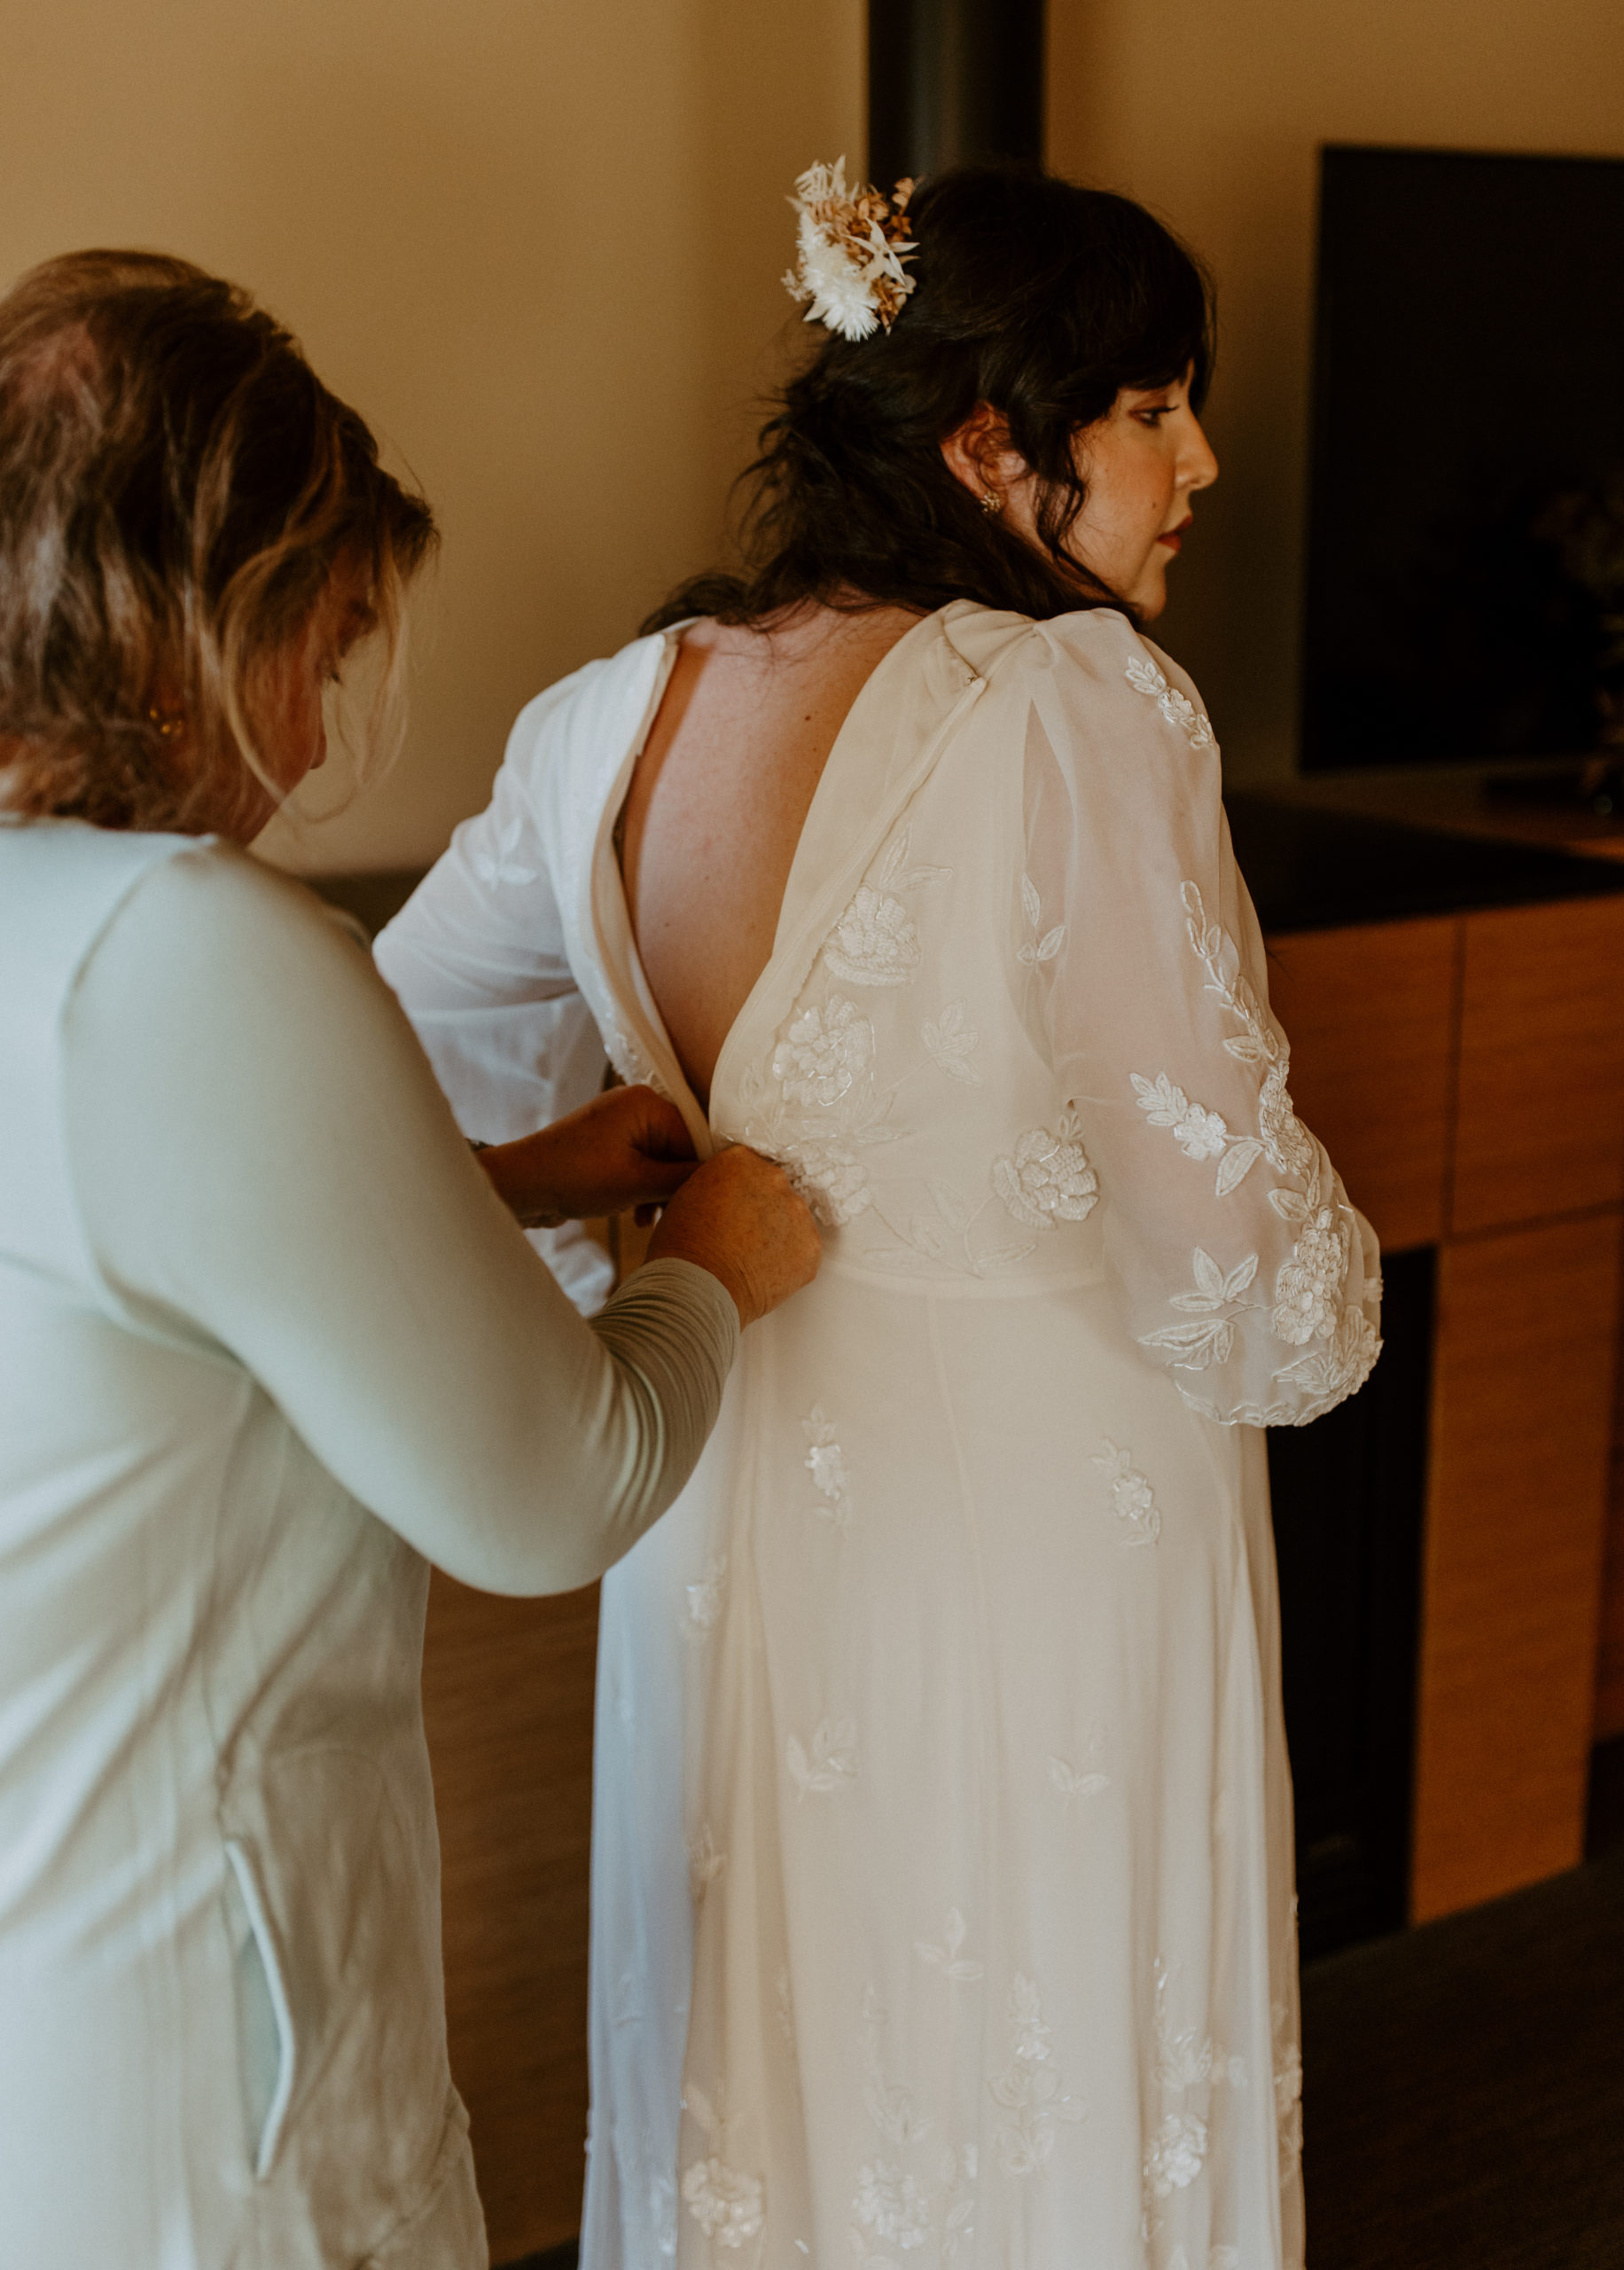 the bride getting her wedding dress on 